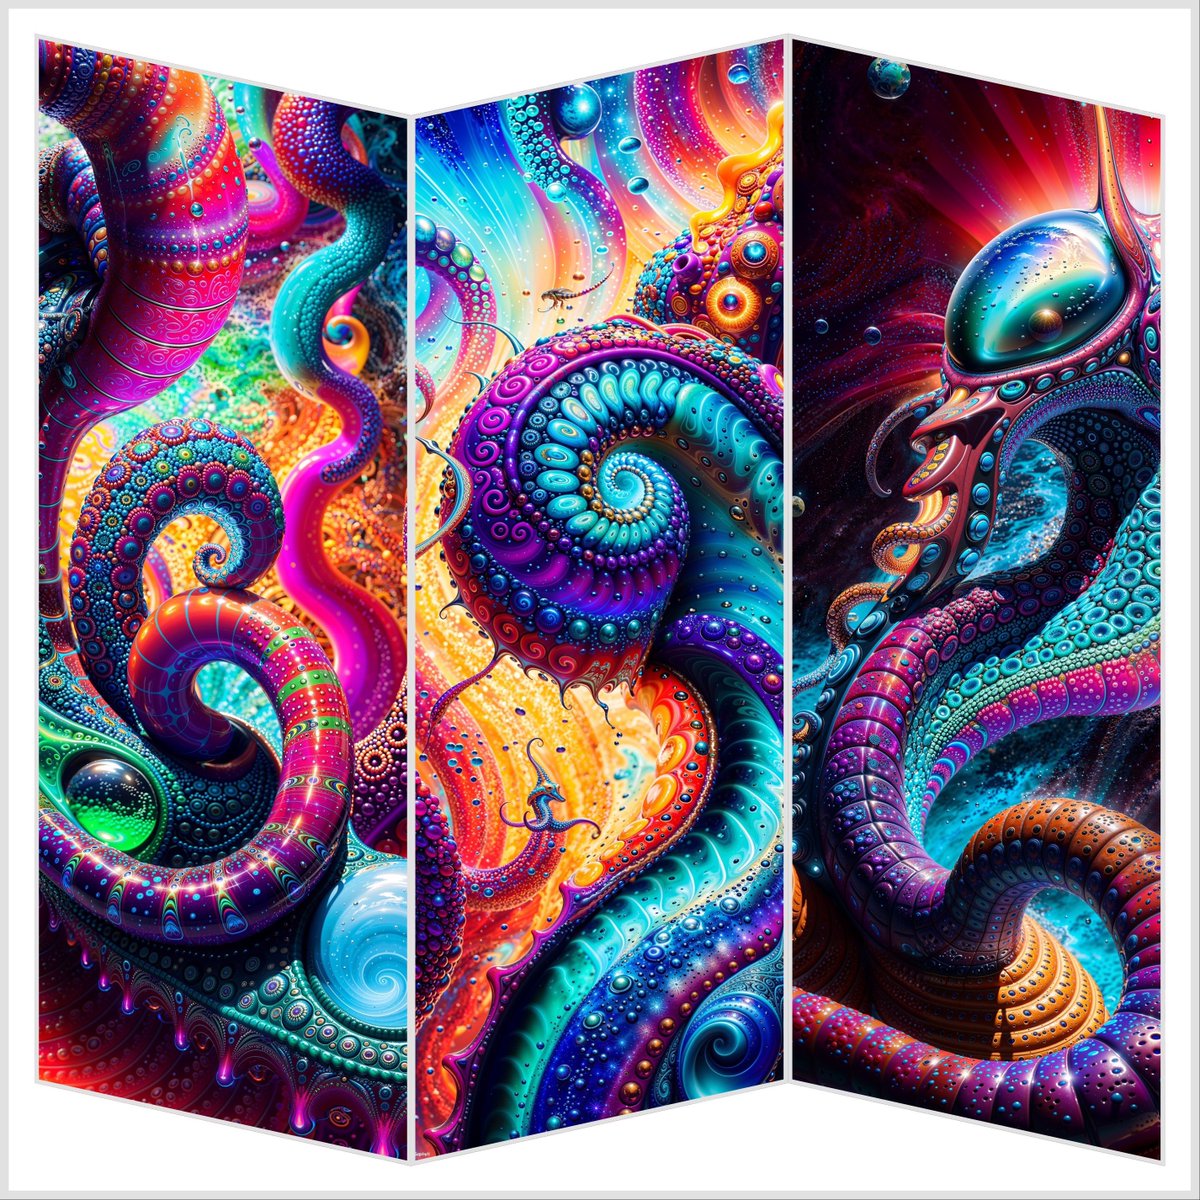 ✨ Here's a preview of some artworks from my Quantum Helix collection. 
True art has the power to amaze and inspire. 
Explore and immerse yourself in the world of aesthetics! 
#ArtTeaser #VisualElegance